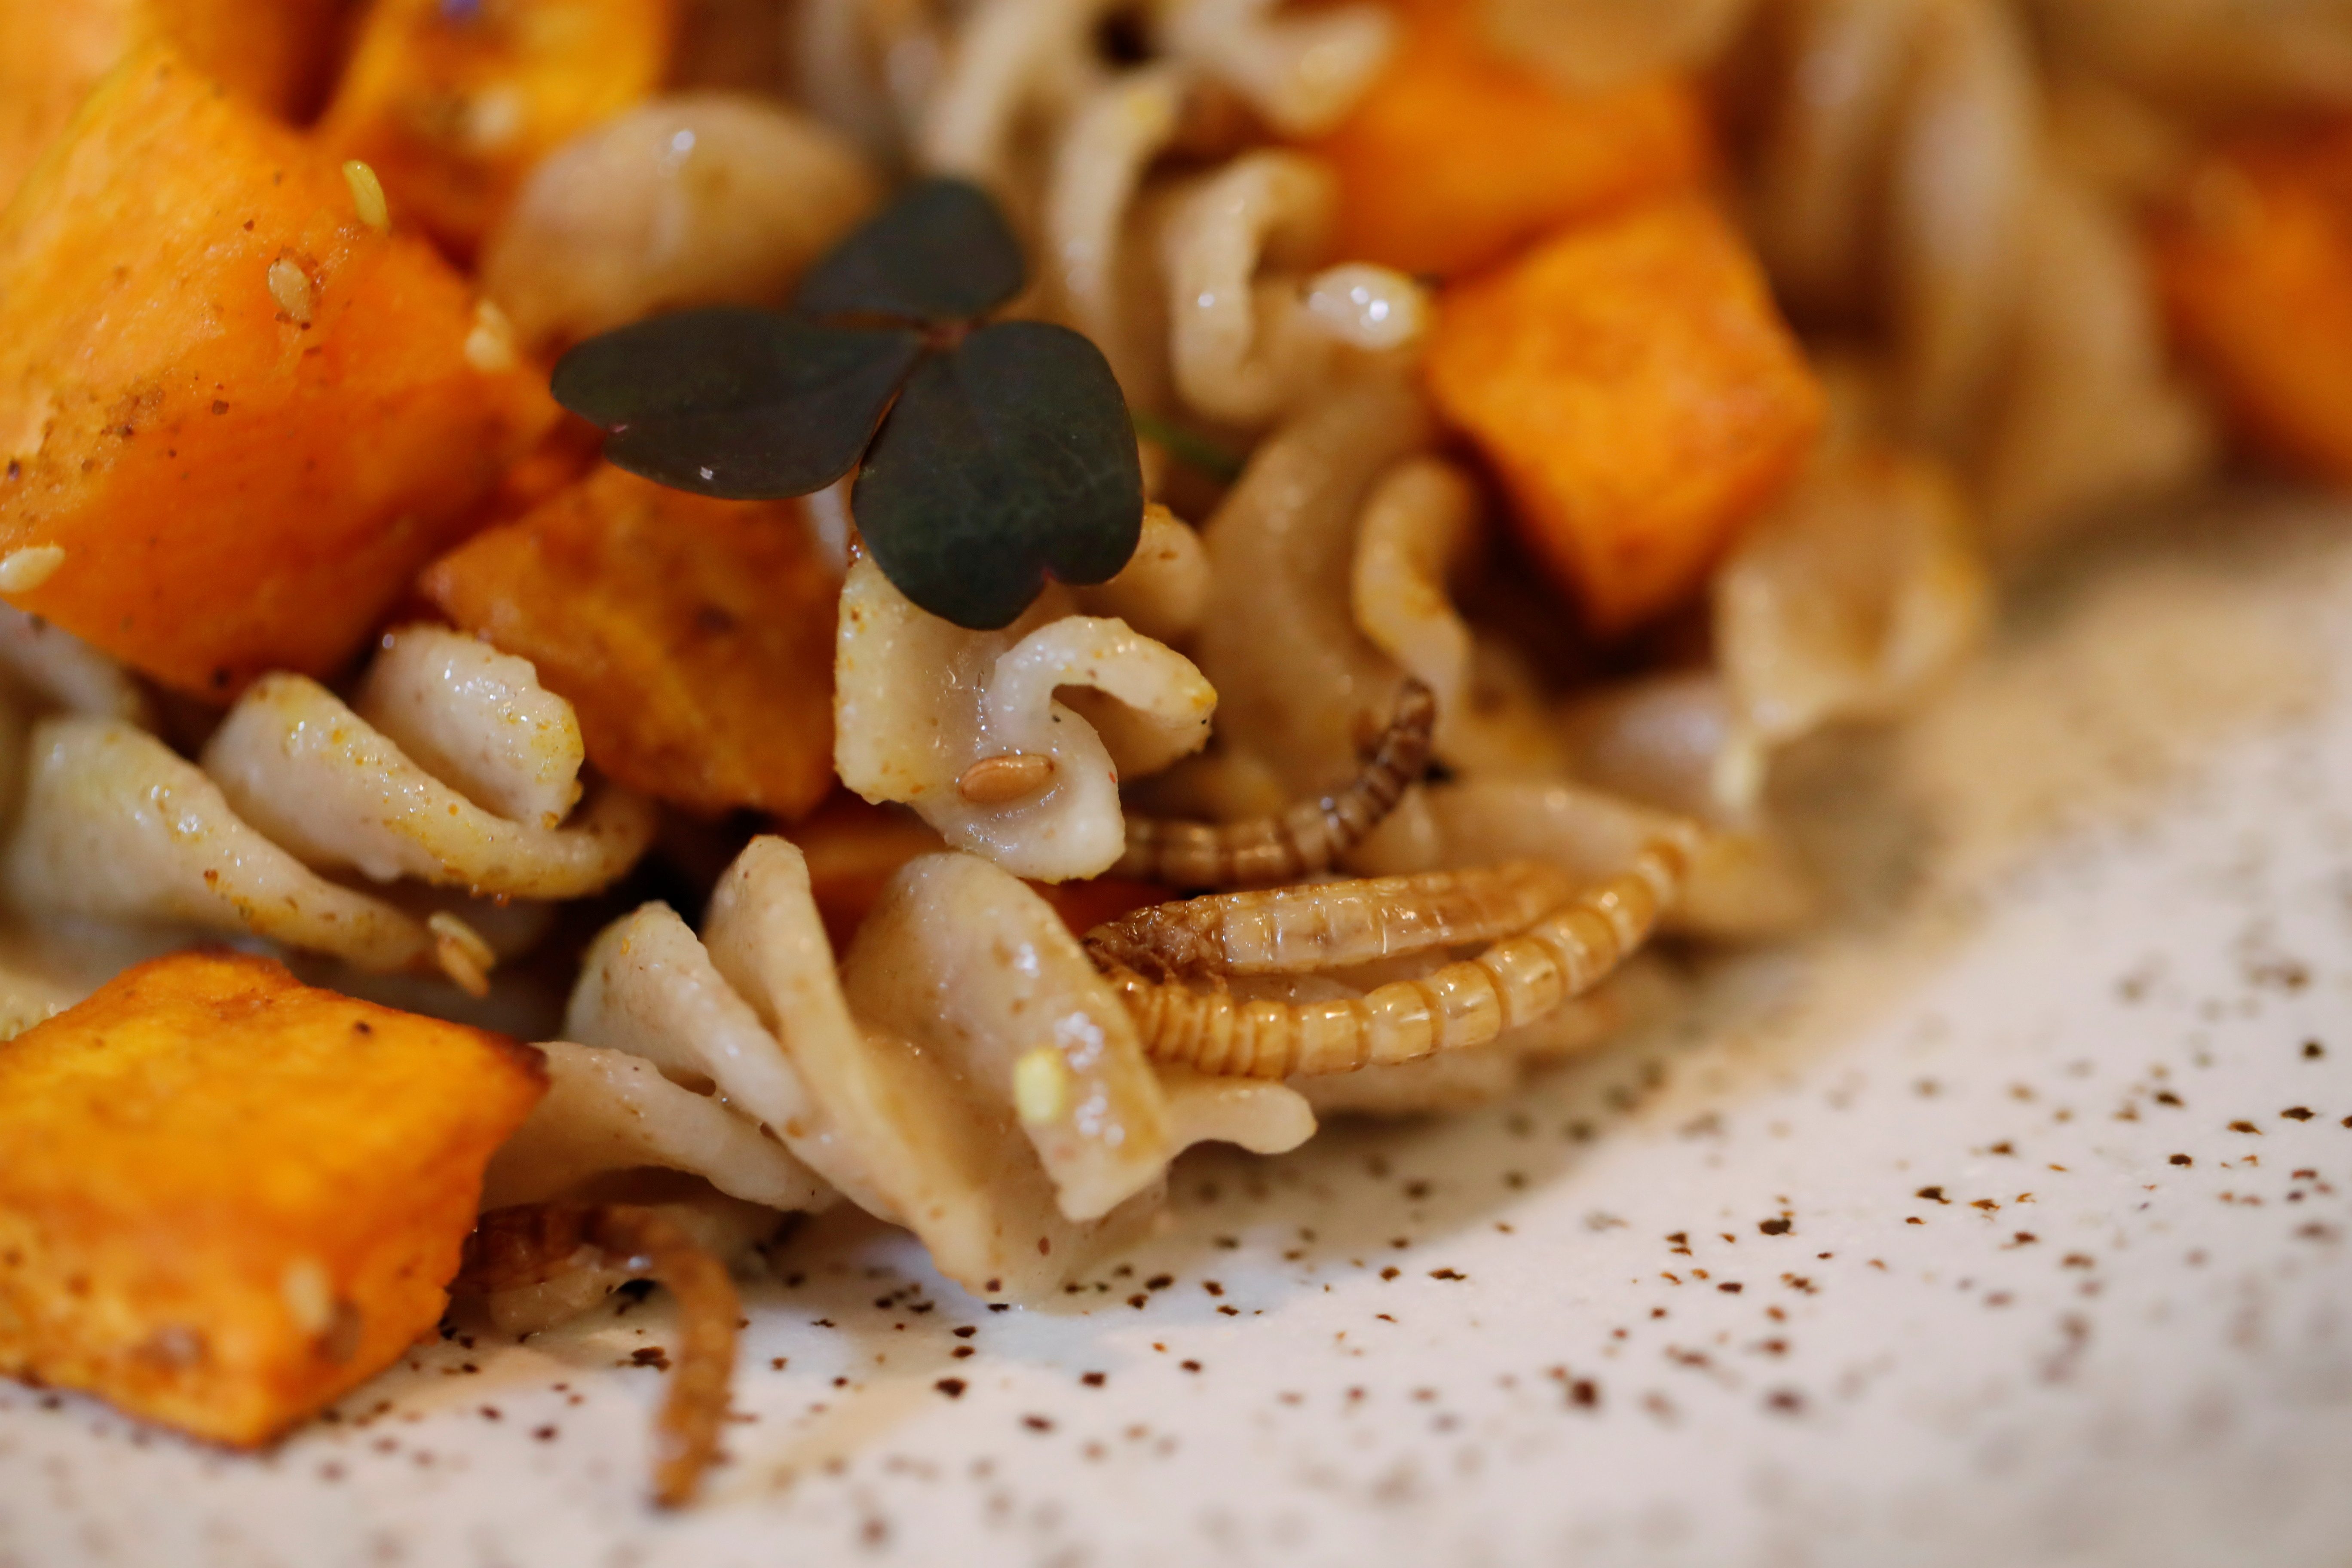 French restaurant serves up insects, the food of the future